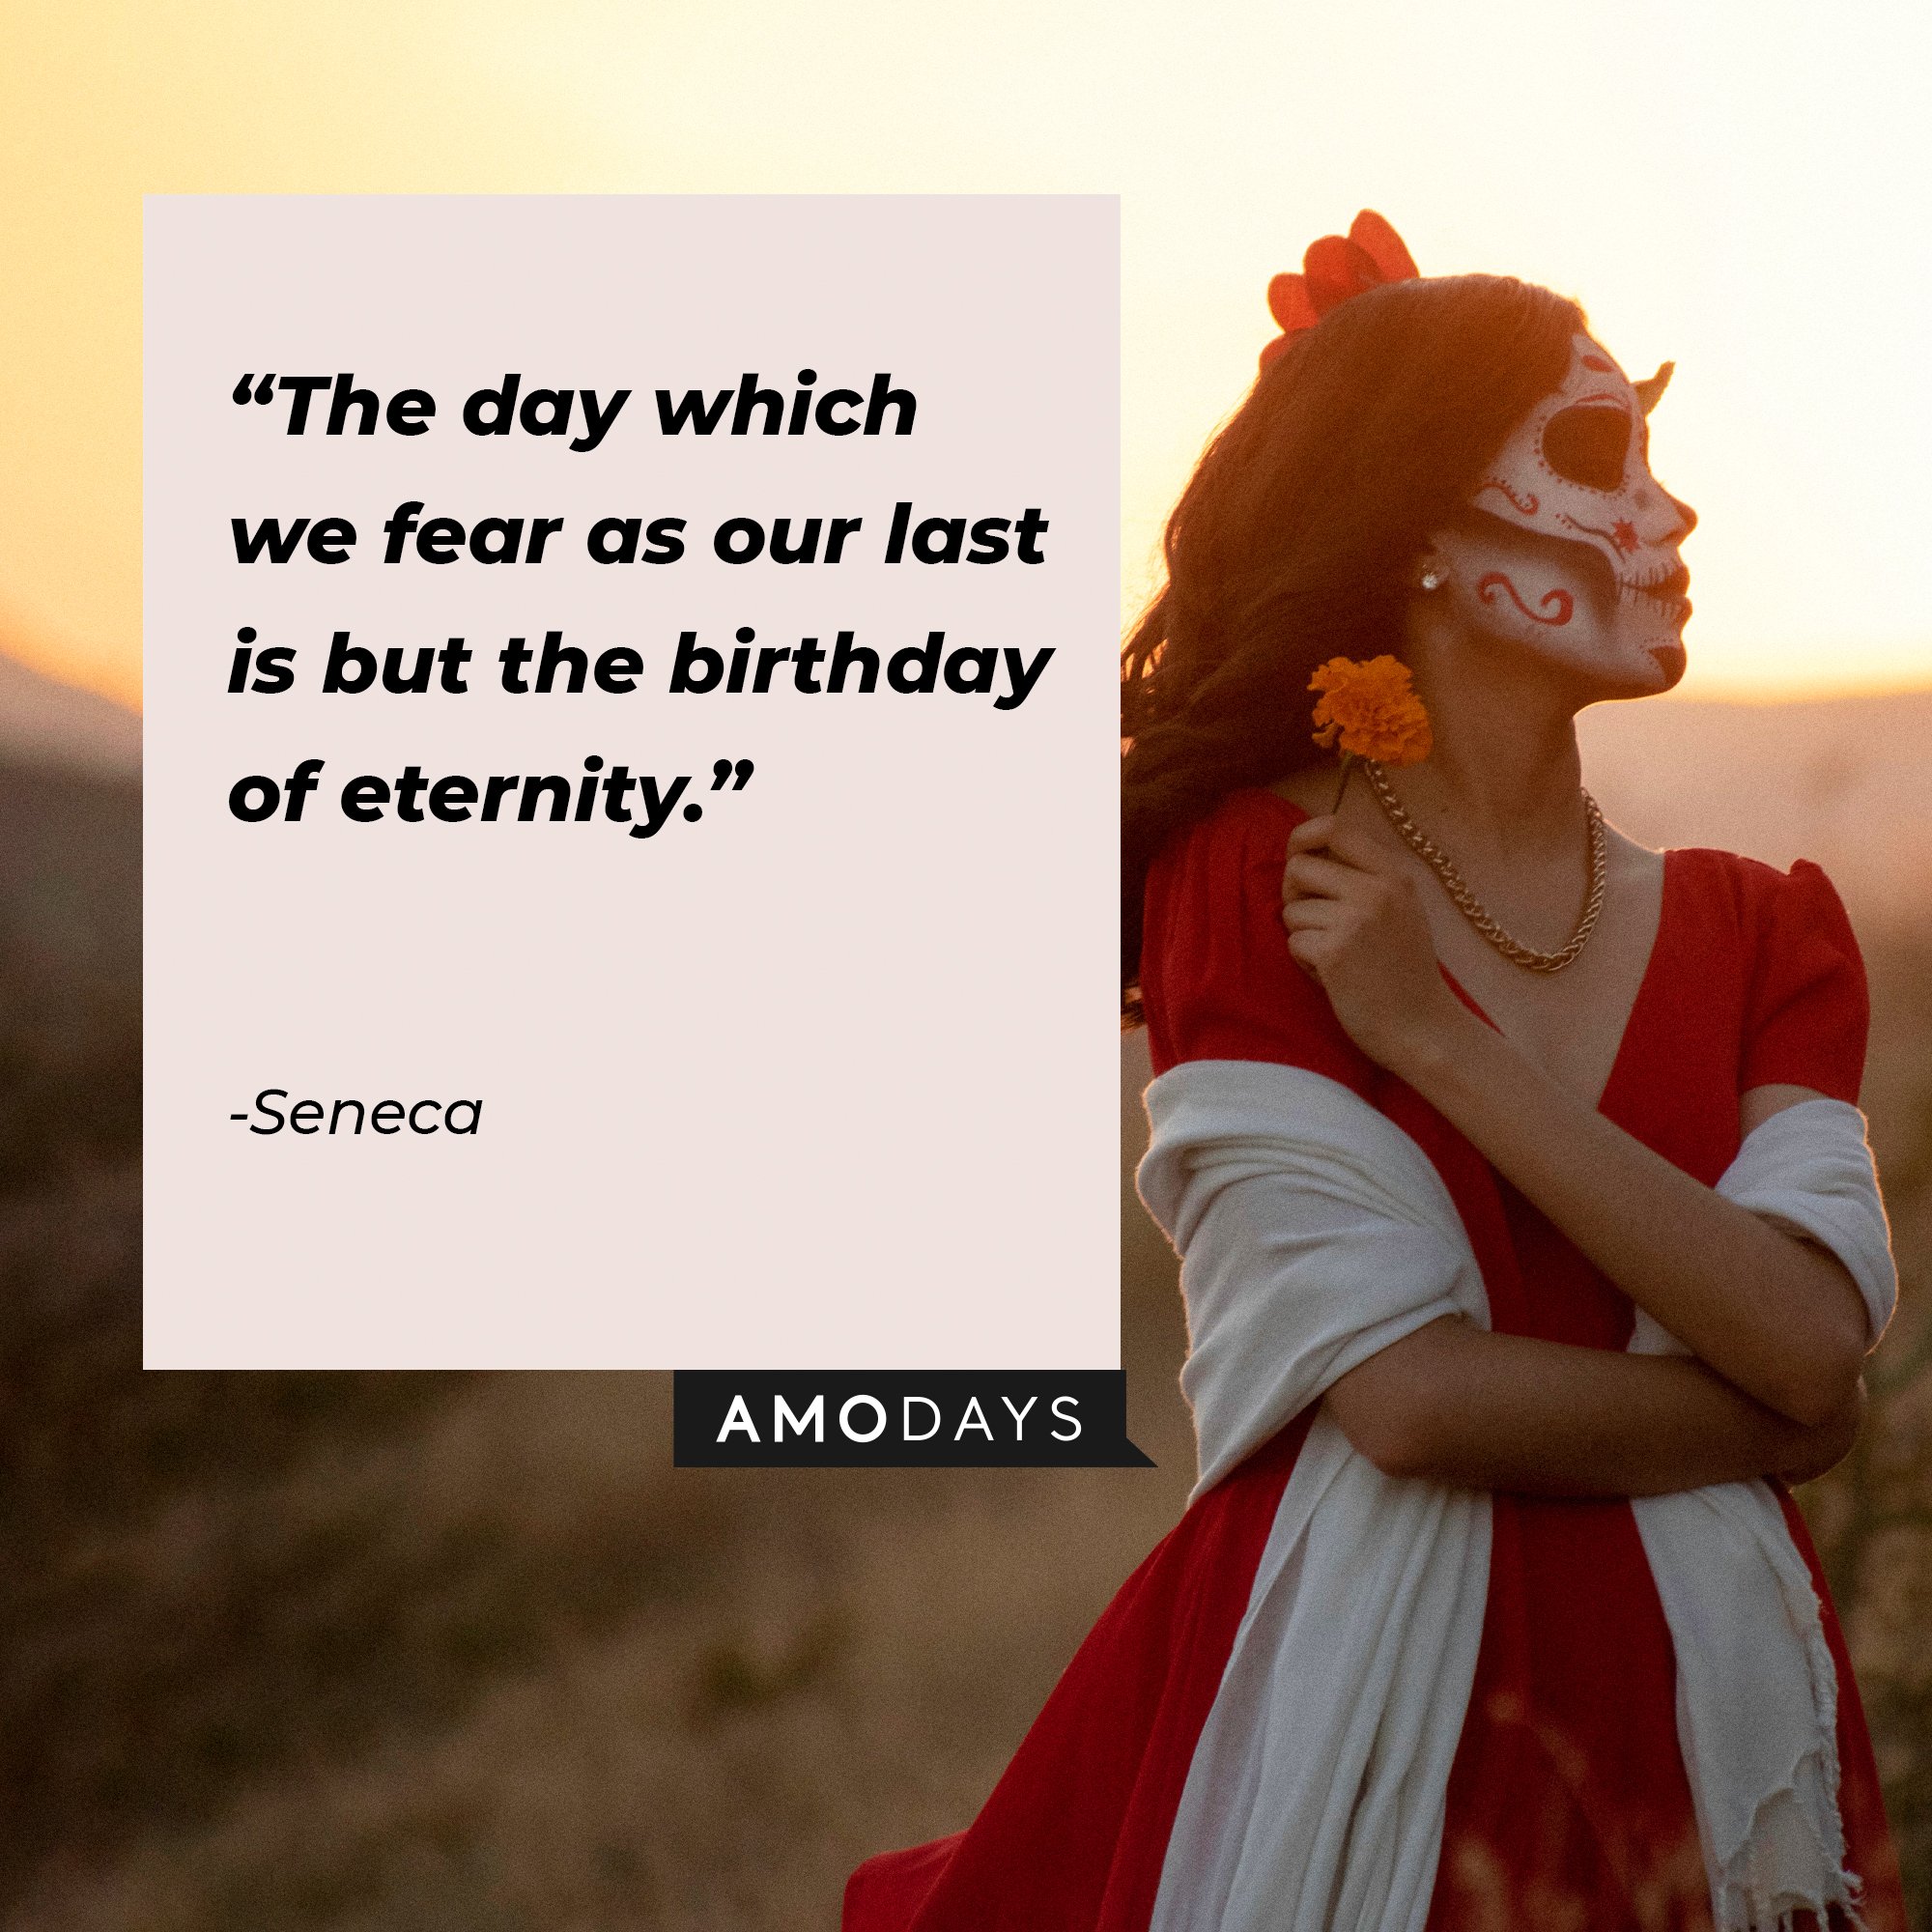 Seneca’s quote: "The day which we fear as our last is but the birthday of eternity." | Image: AmoDays  